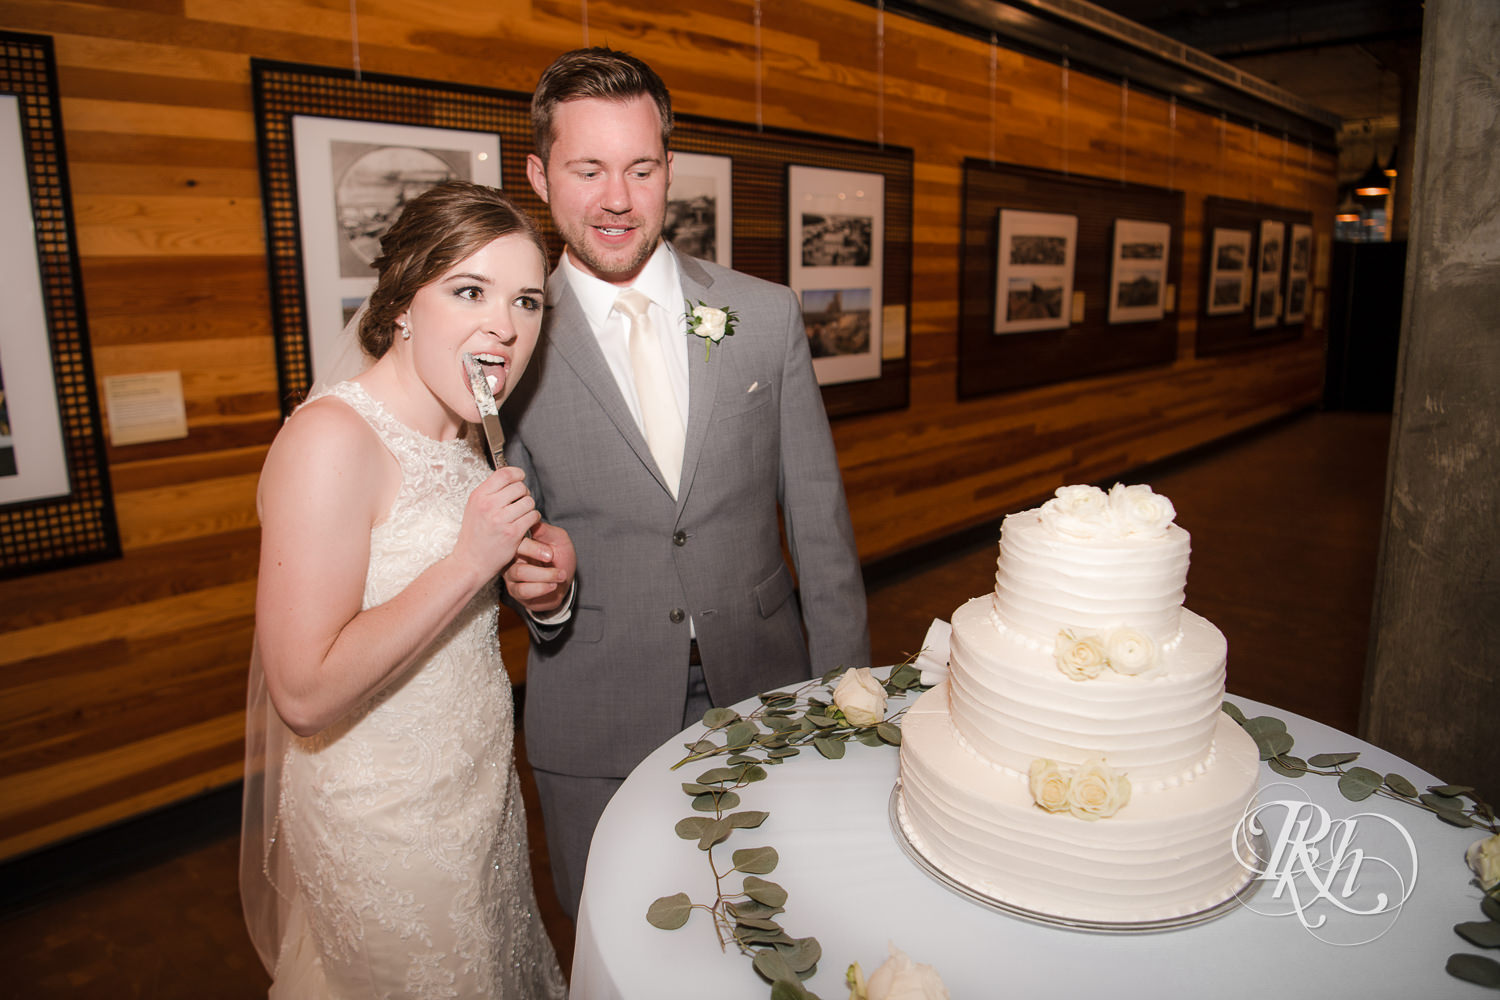 Bride and groom cut cake during wedding reception at Mill City Museum in Minneapolis, Minnesota.